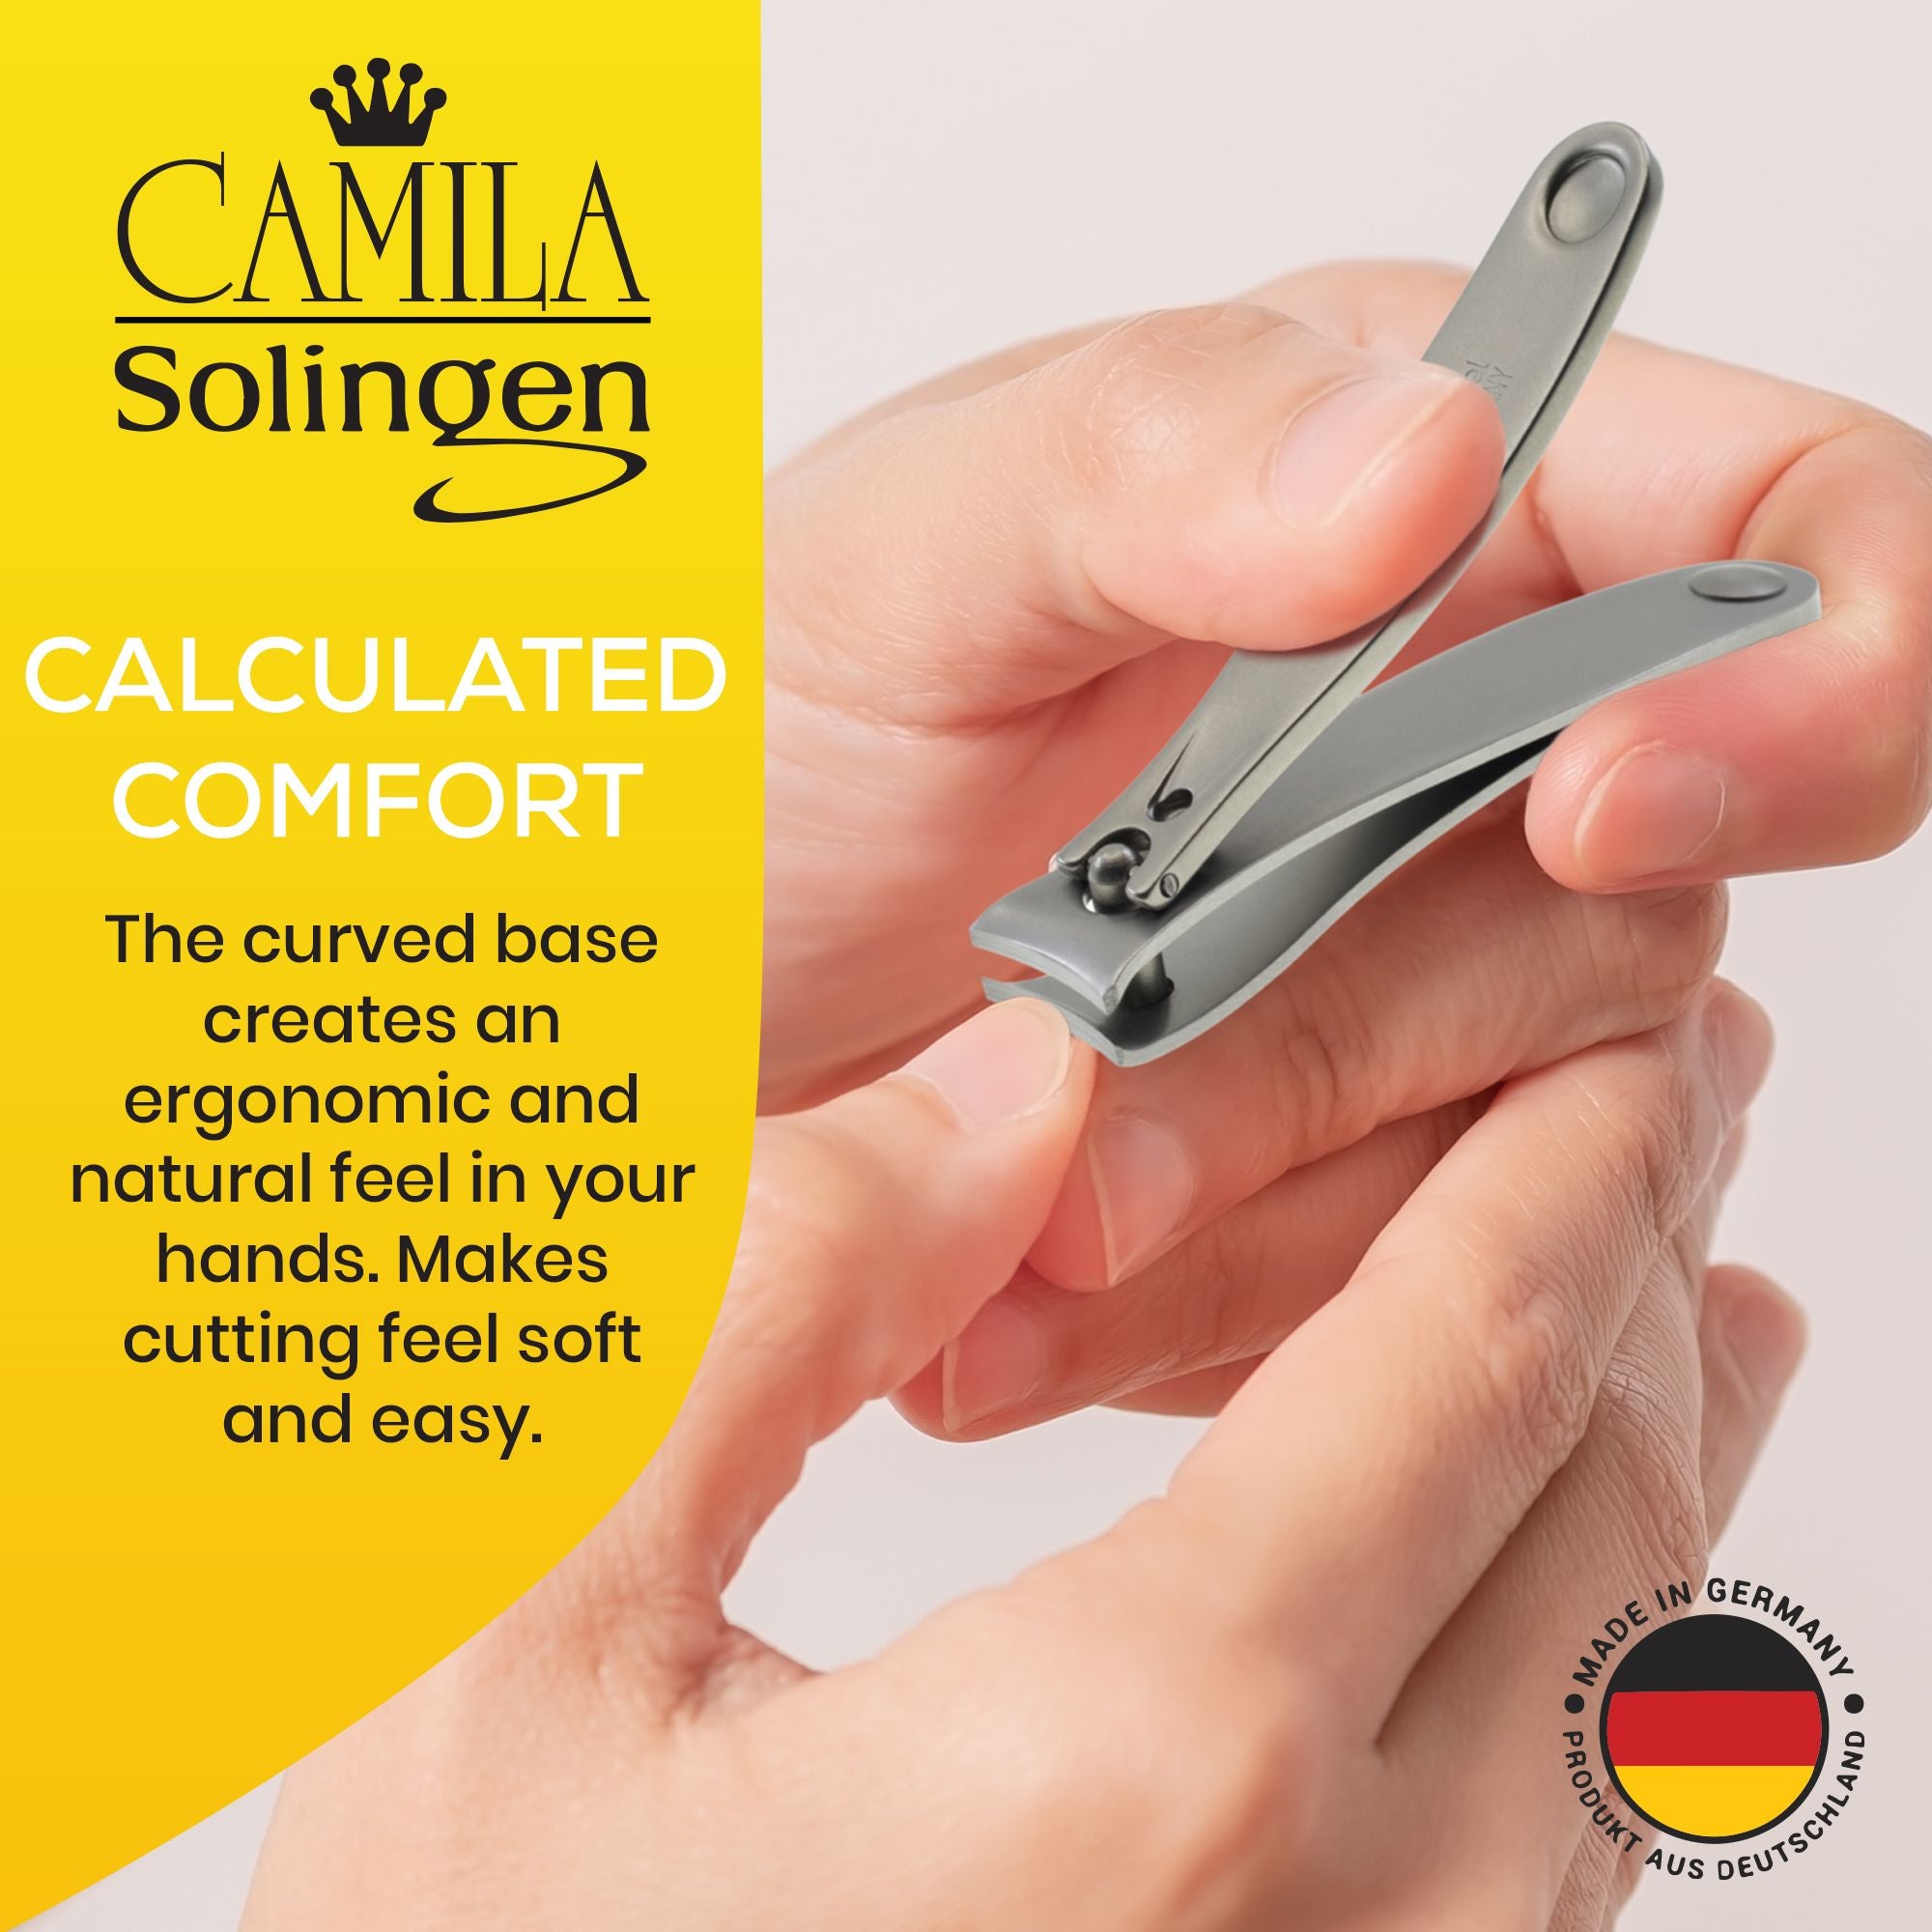 Camila Solingen CS08 4 Professional Nail Cuticle Trimmer from